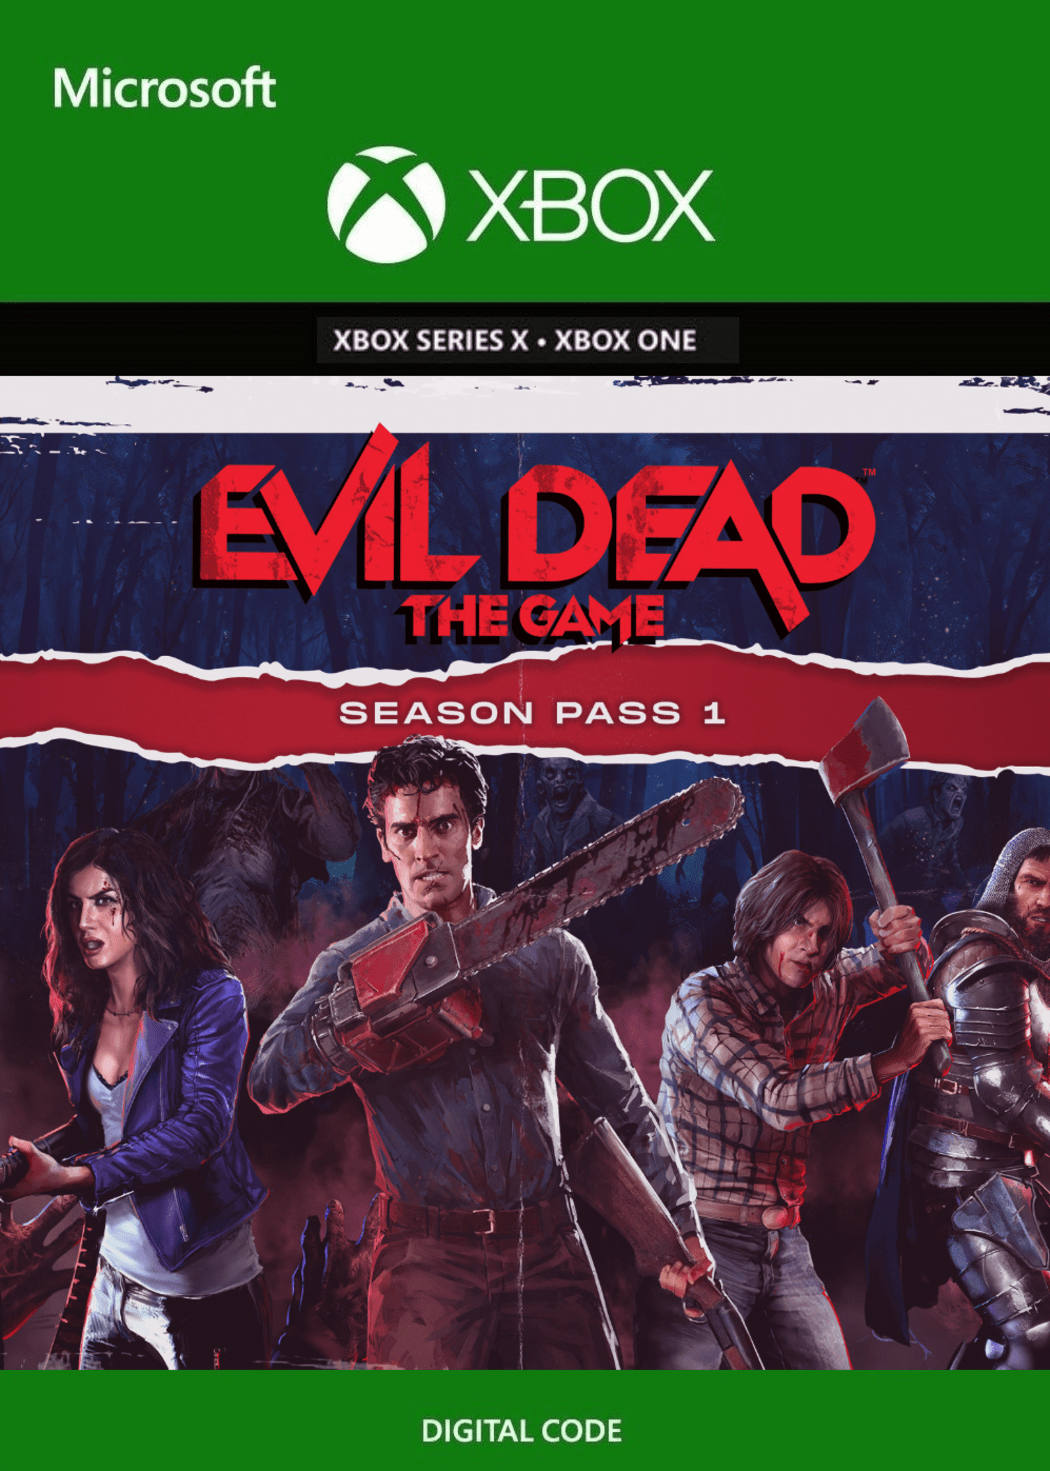 Is the Evil Dead game going to be on Game Pass?